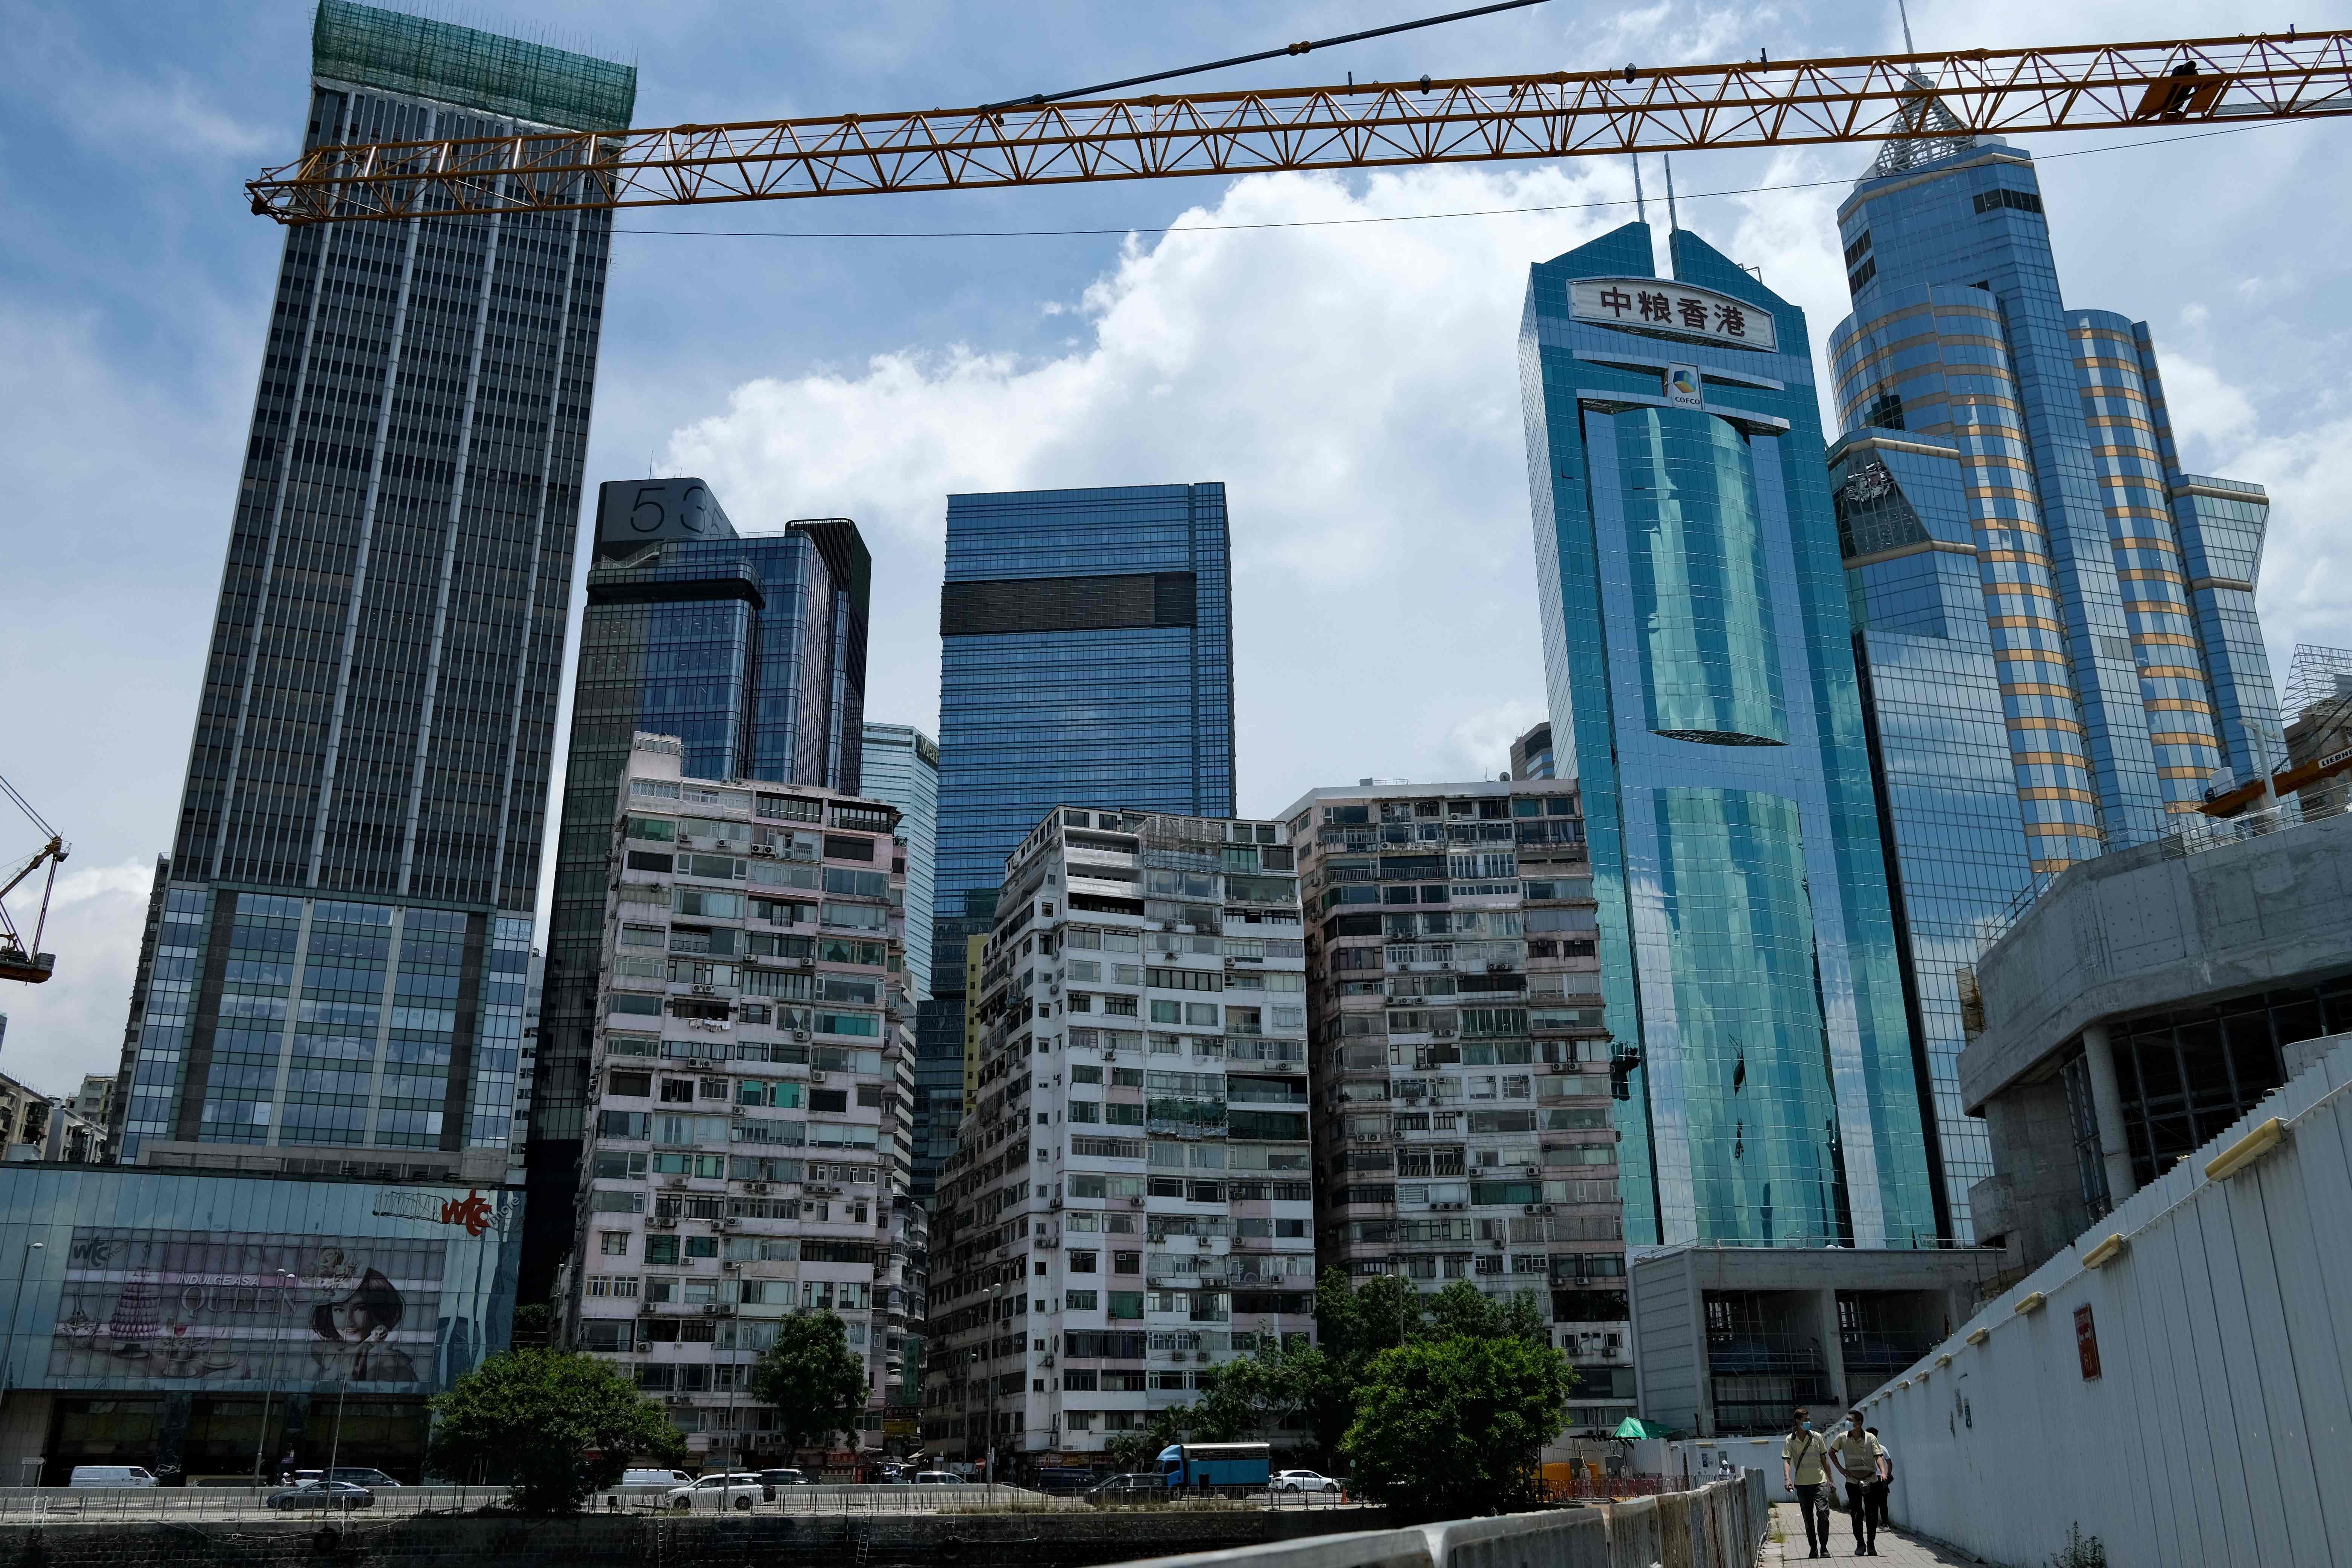 Hong Kong's economy shrunk nine percent on year in the second quarter, the government said on July 29, as the financial hub reels from the fallout of the coronavirus pandemic. Credit: AFP